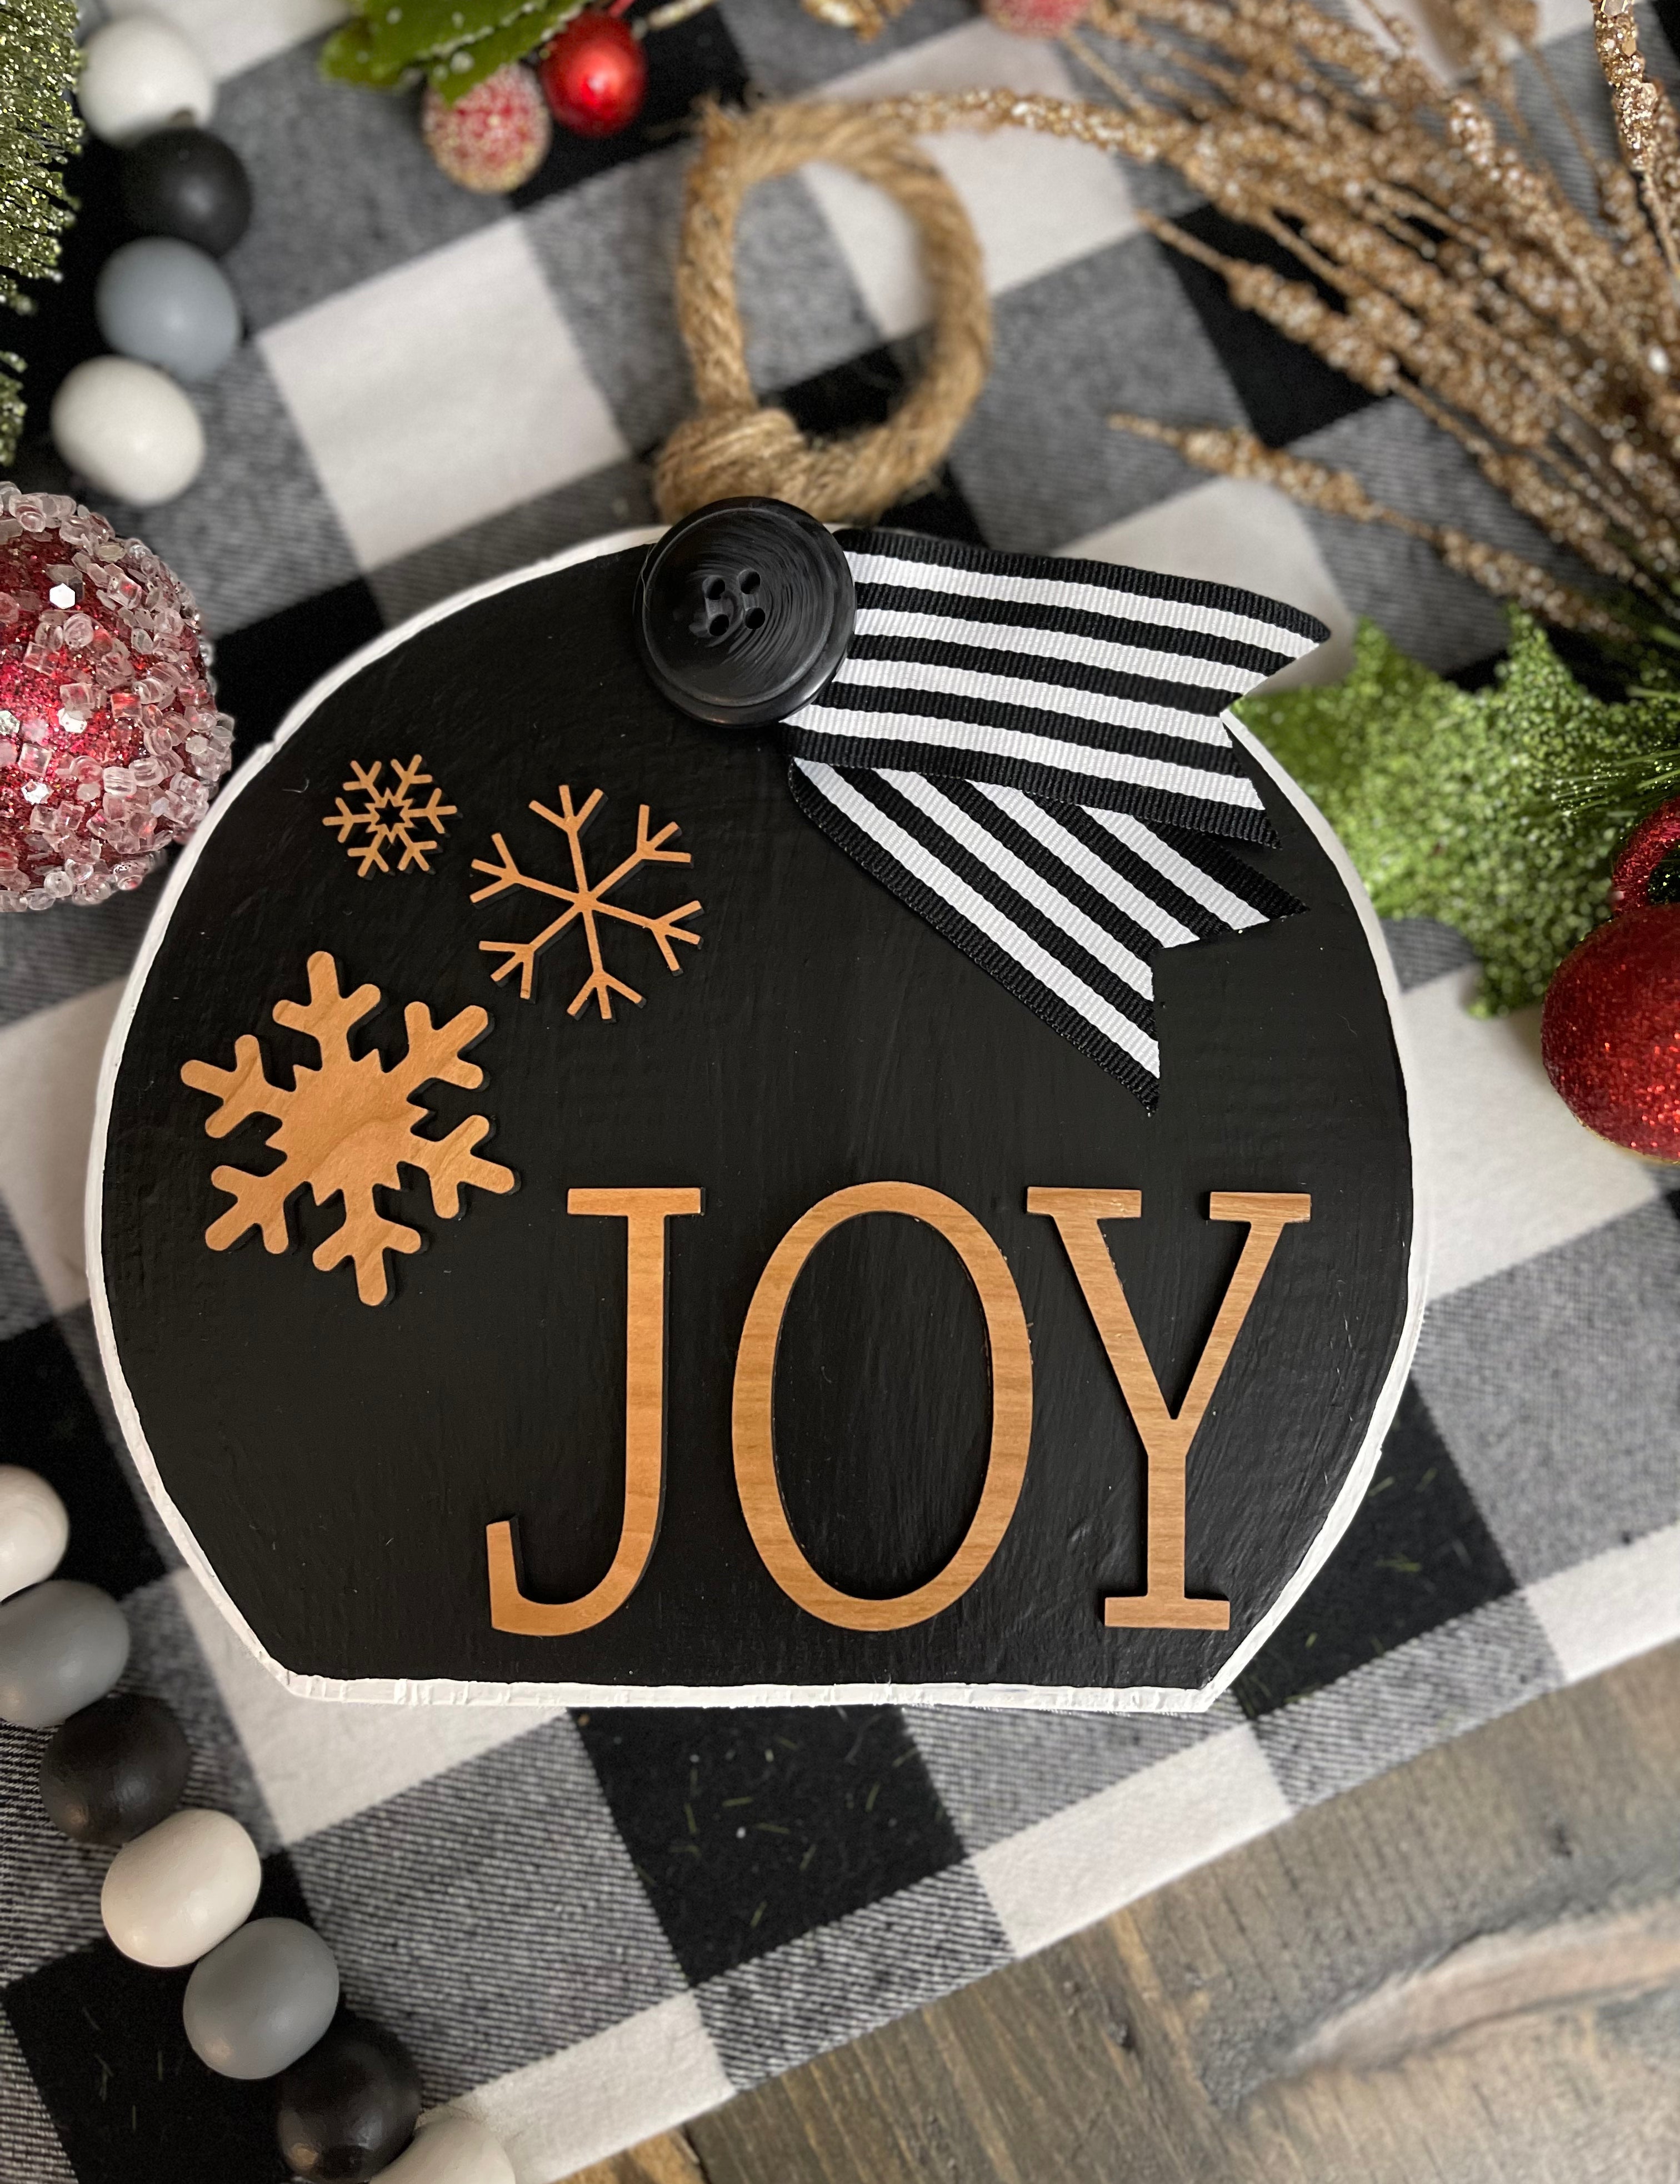 This image shows the large black Joy ornament.